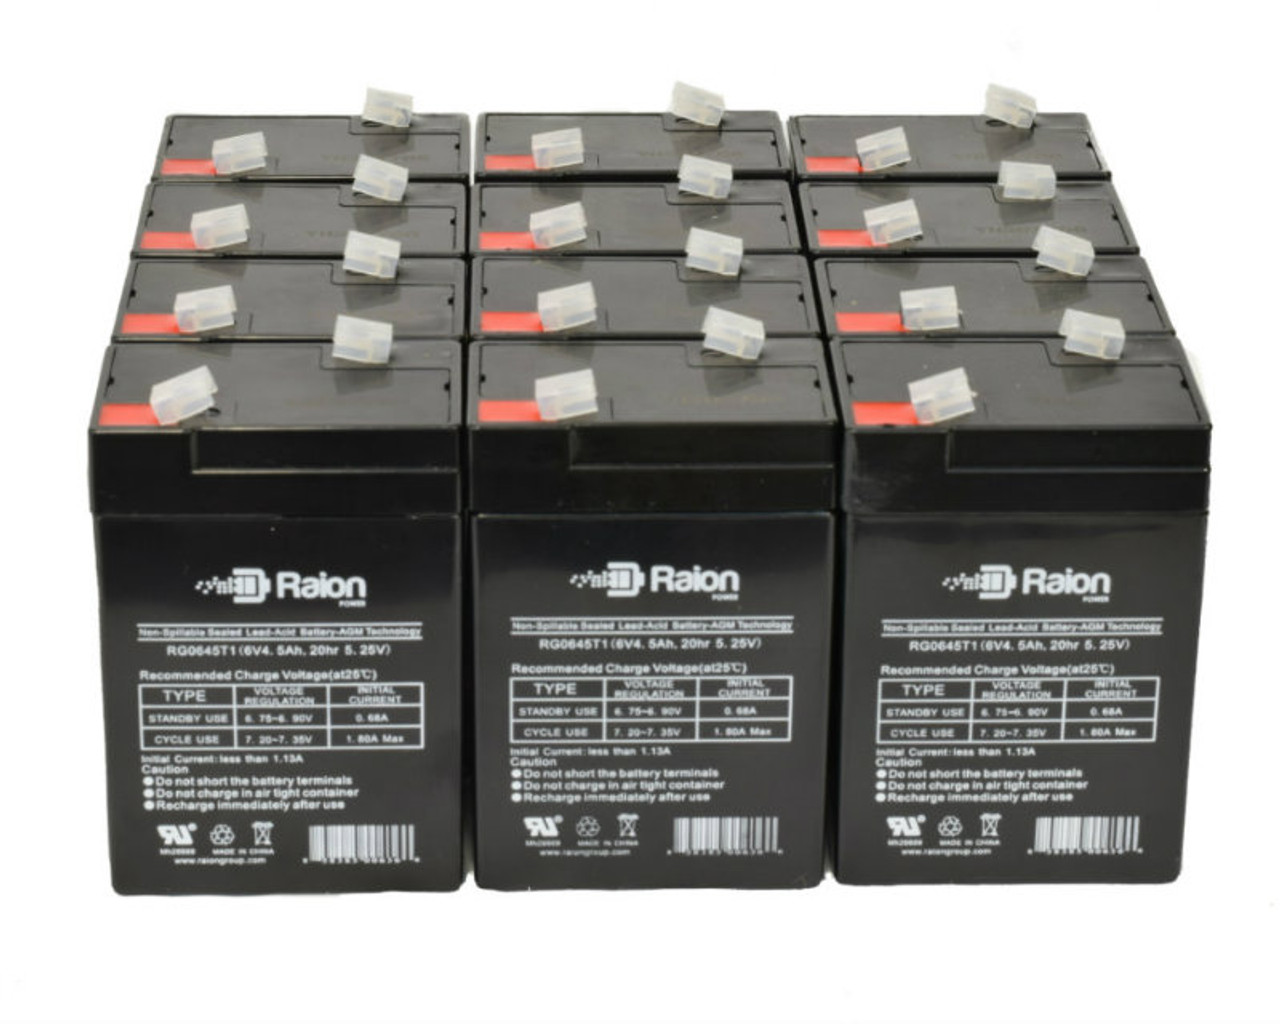 Raion Power 6V 4.5Ah Replacement Emergency Light Battery for Lithonia XP - 12 Pack